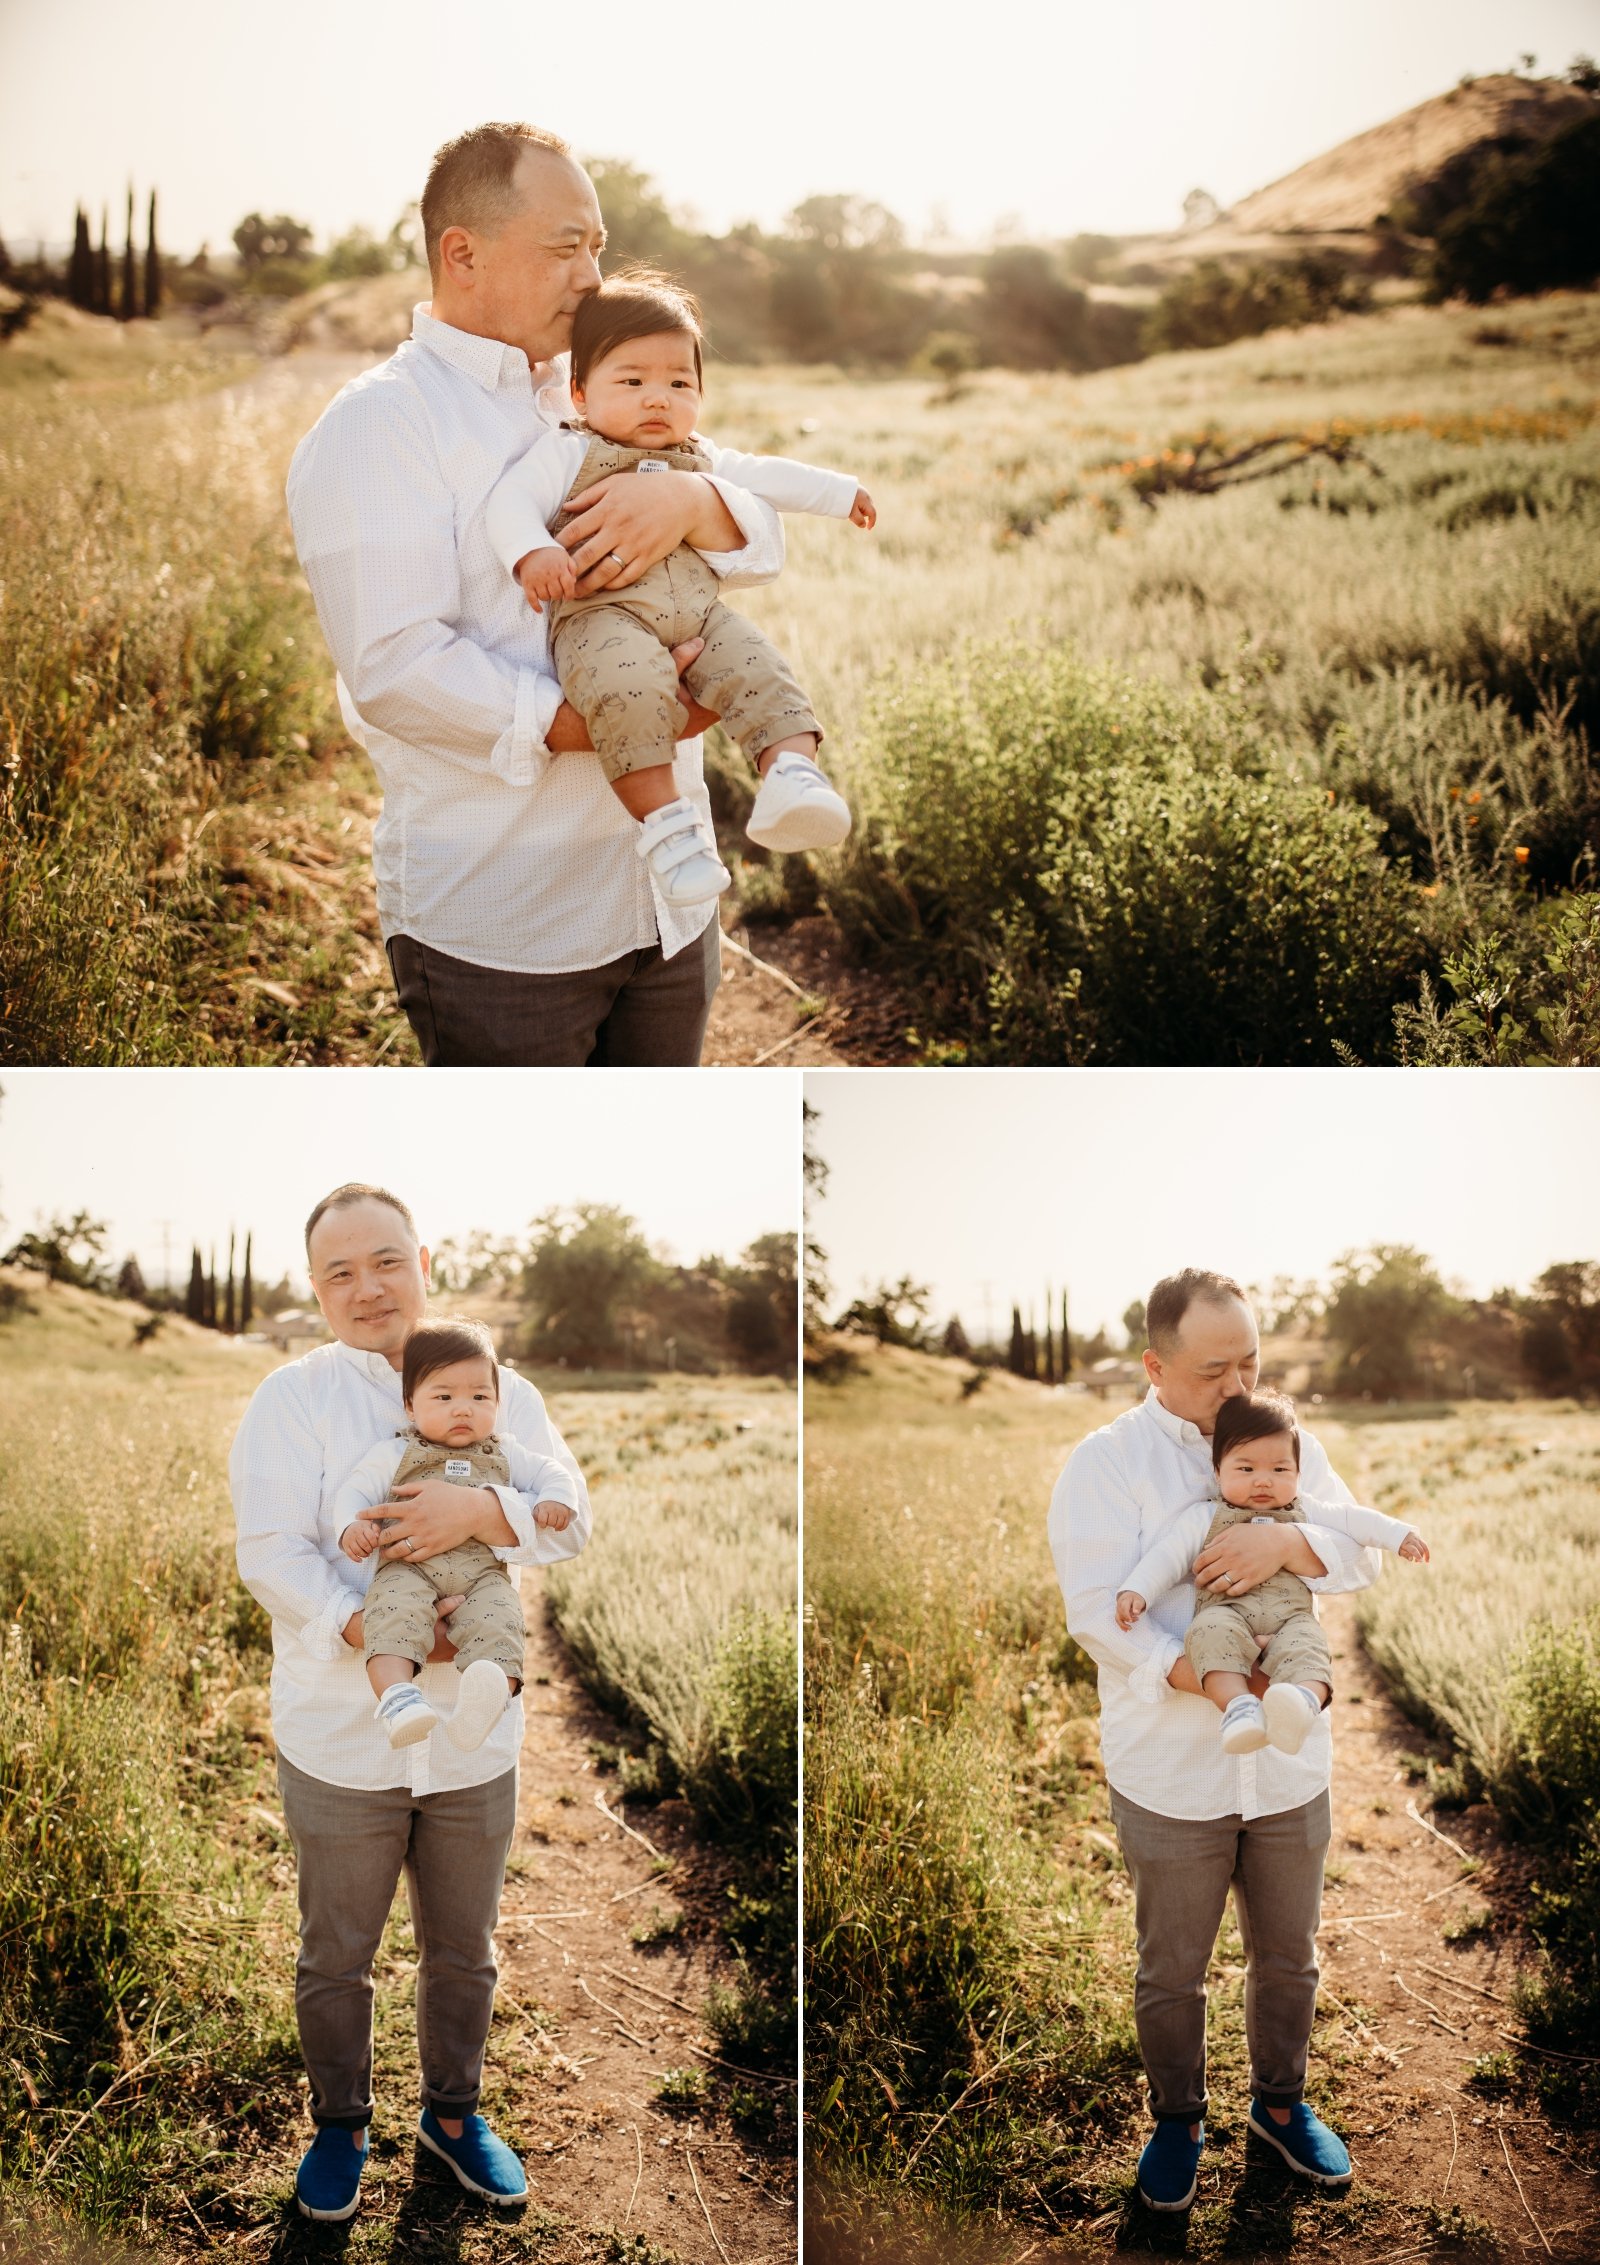 EAST BAY AREA FAMILY PHOTOGRAPHY SHELL RIDGE OPEN SPACE BABY LIFESTYLE PHOTOSHOOT  8.jpg